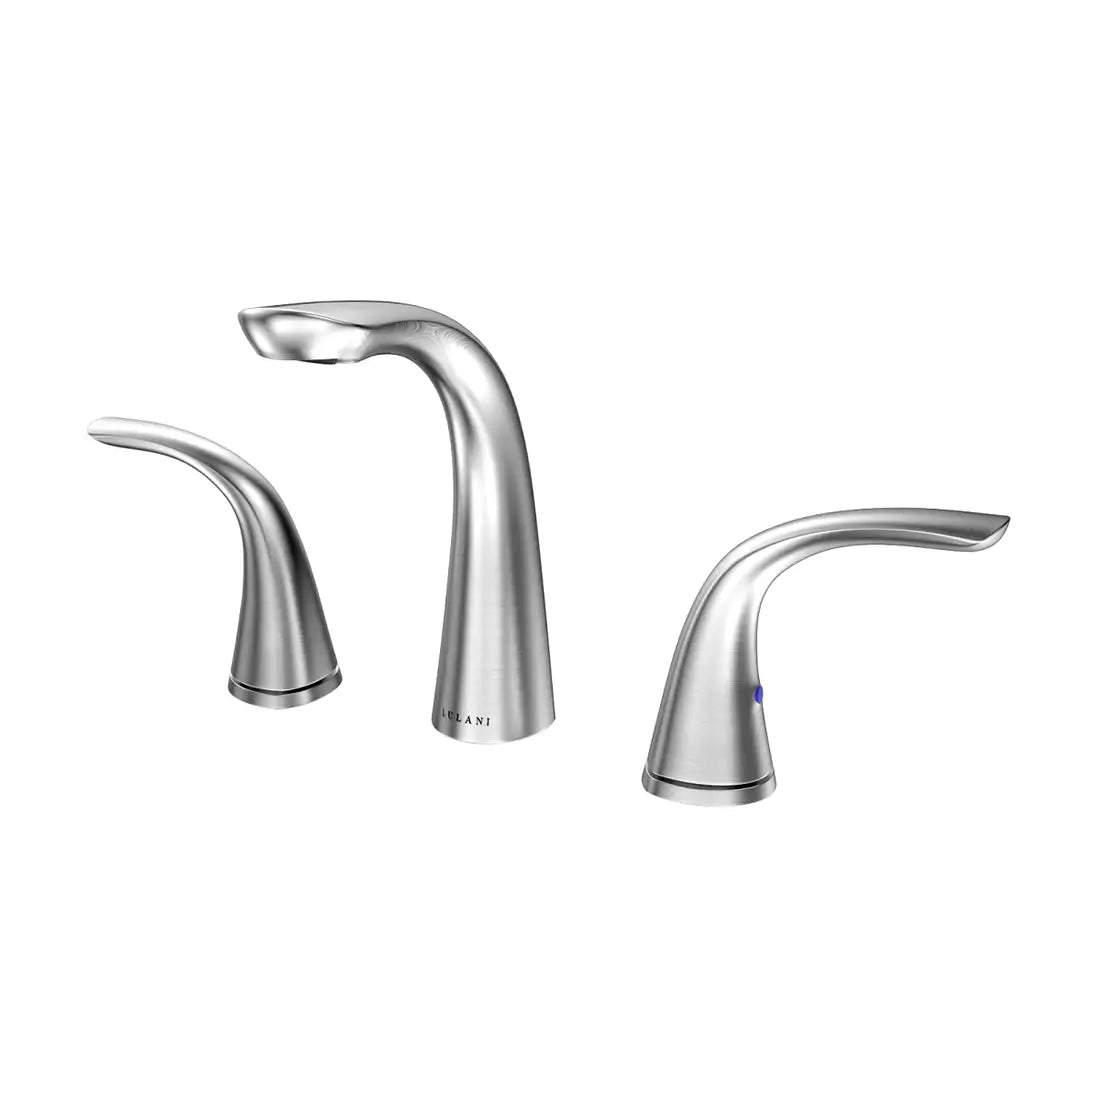 Open Box - Kauai, Widespread Bathroom Faucet with Drain Assembly